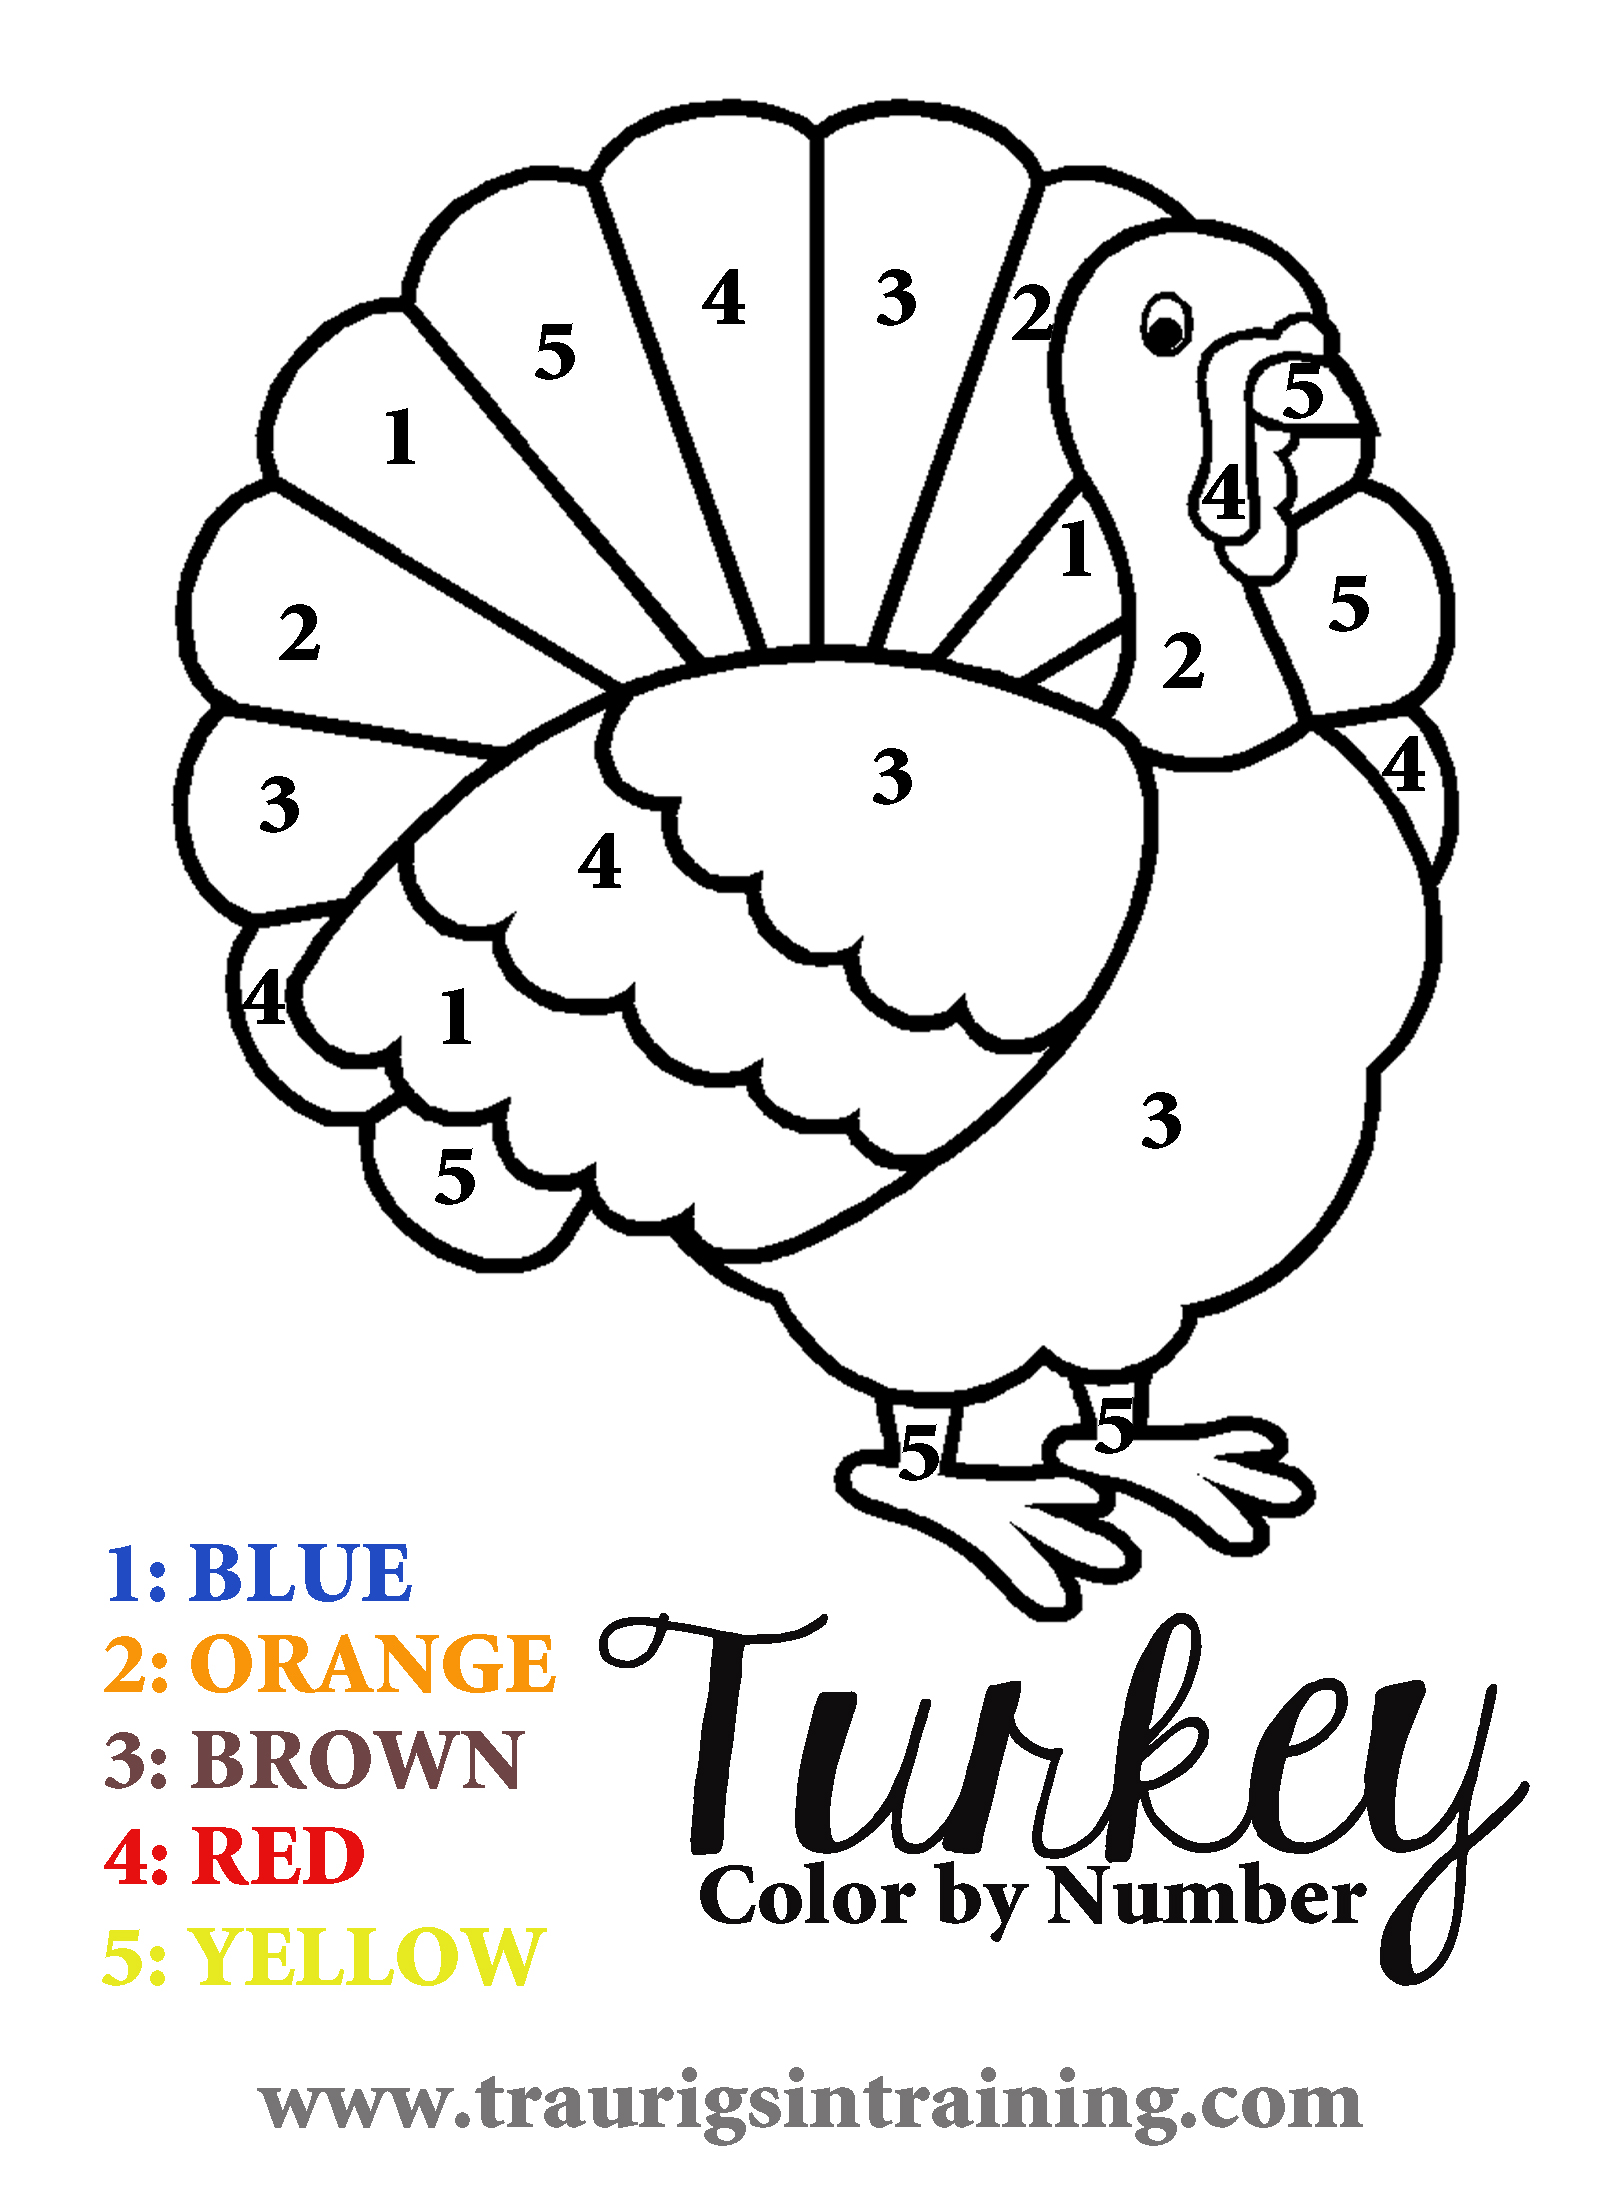 6 Best Images of Free Printable Color By Number Turkey ...